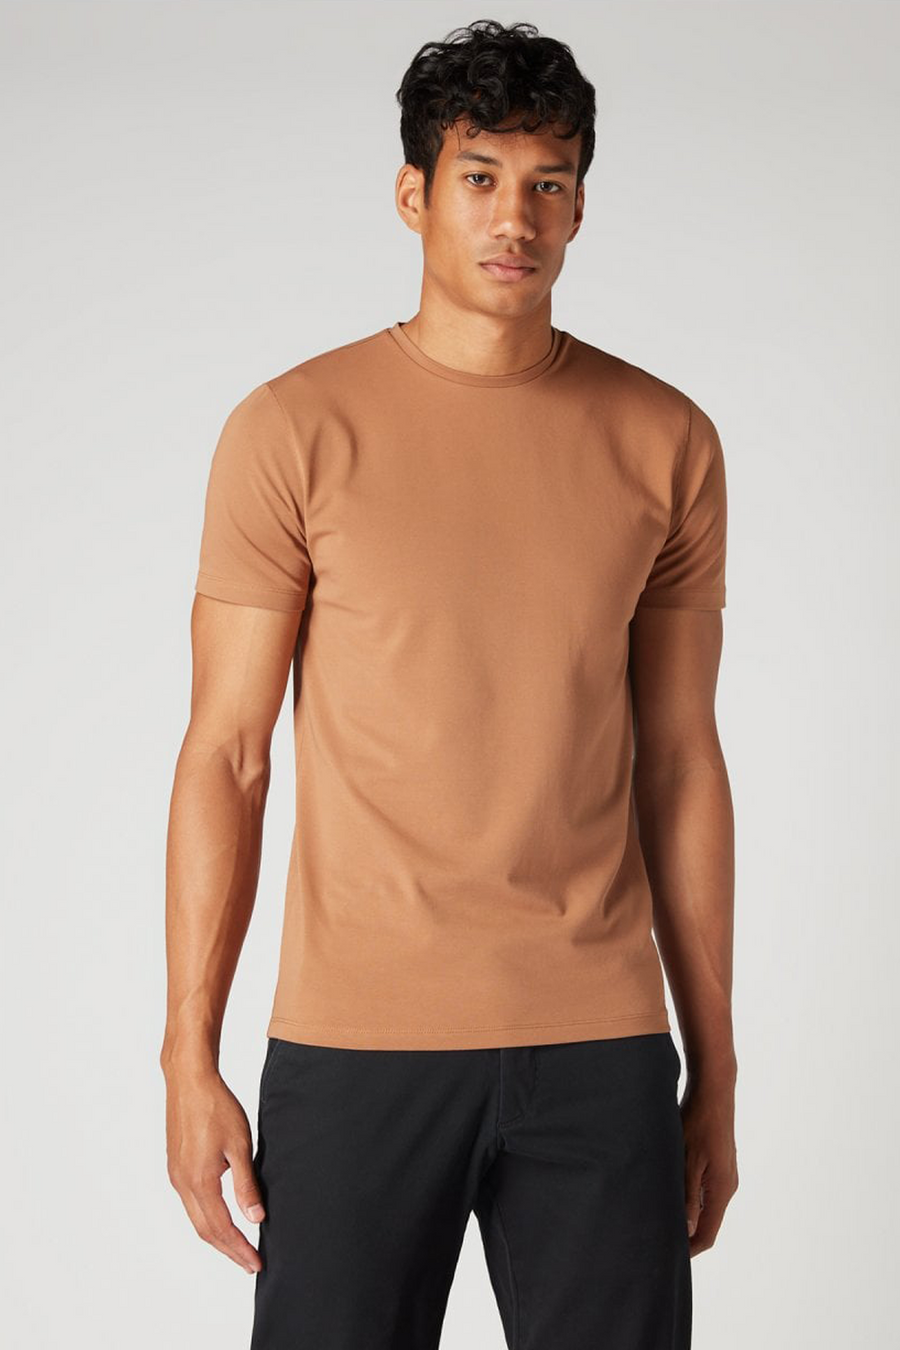 Buy the Remus Uomo Basic Round Neck T-Shirt Camel at Intro. Spend £50 for free UK delivery. Official stockists. We ship worldwide.